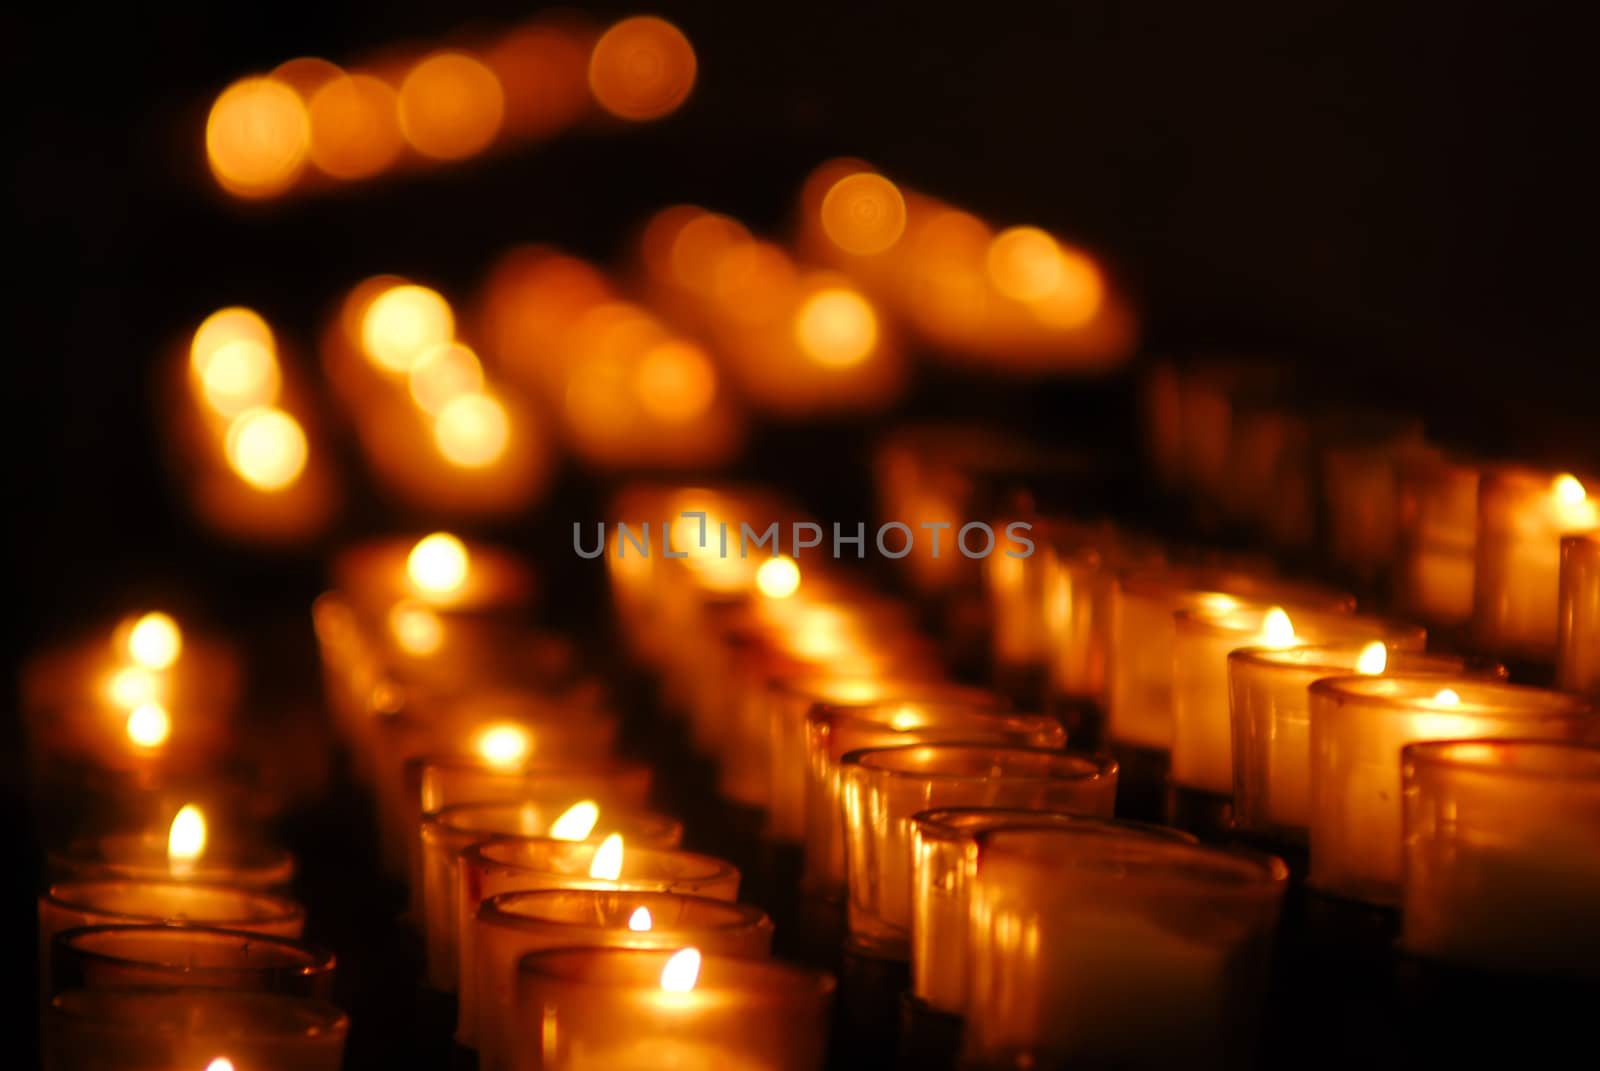 Charity. Lignting of Praying candles in a temple.